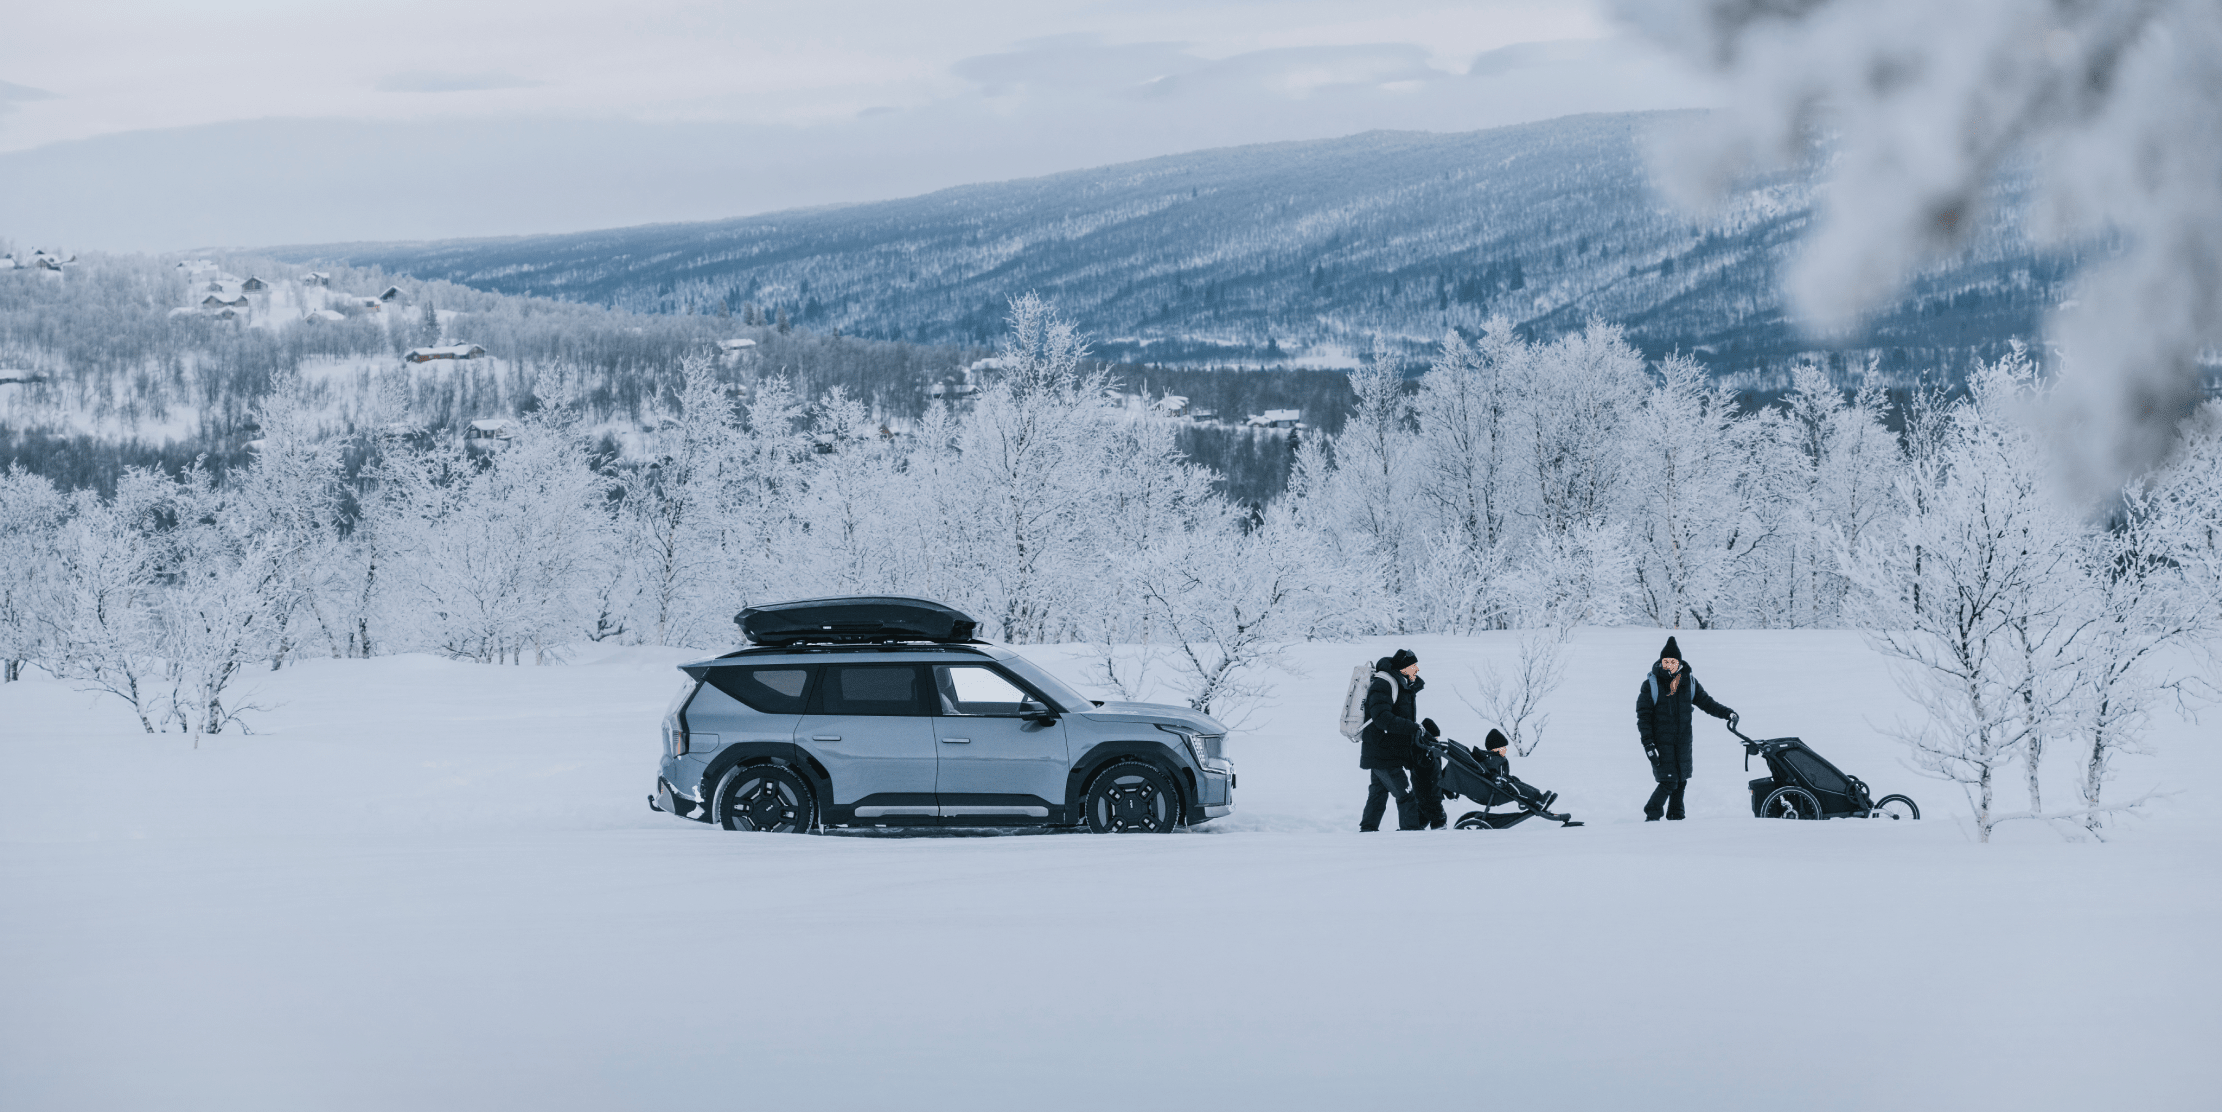 Car and people in snow landscape